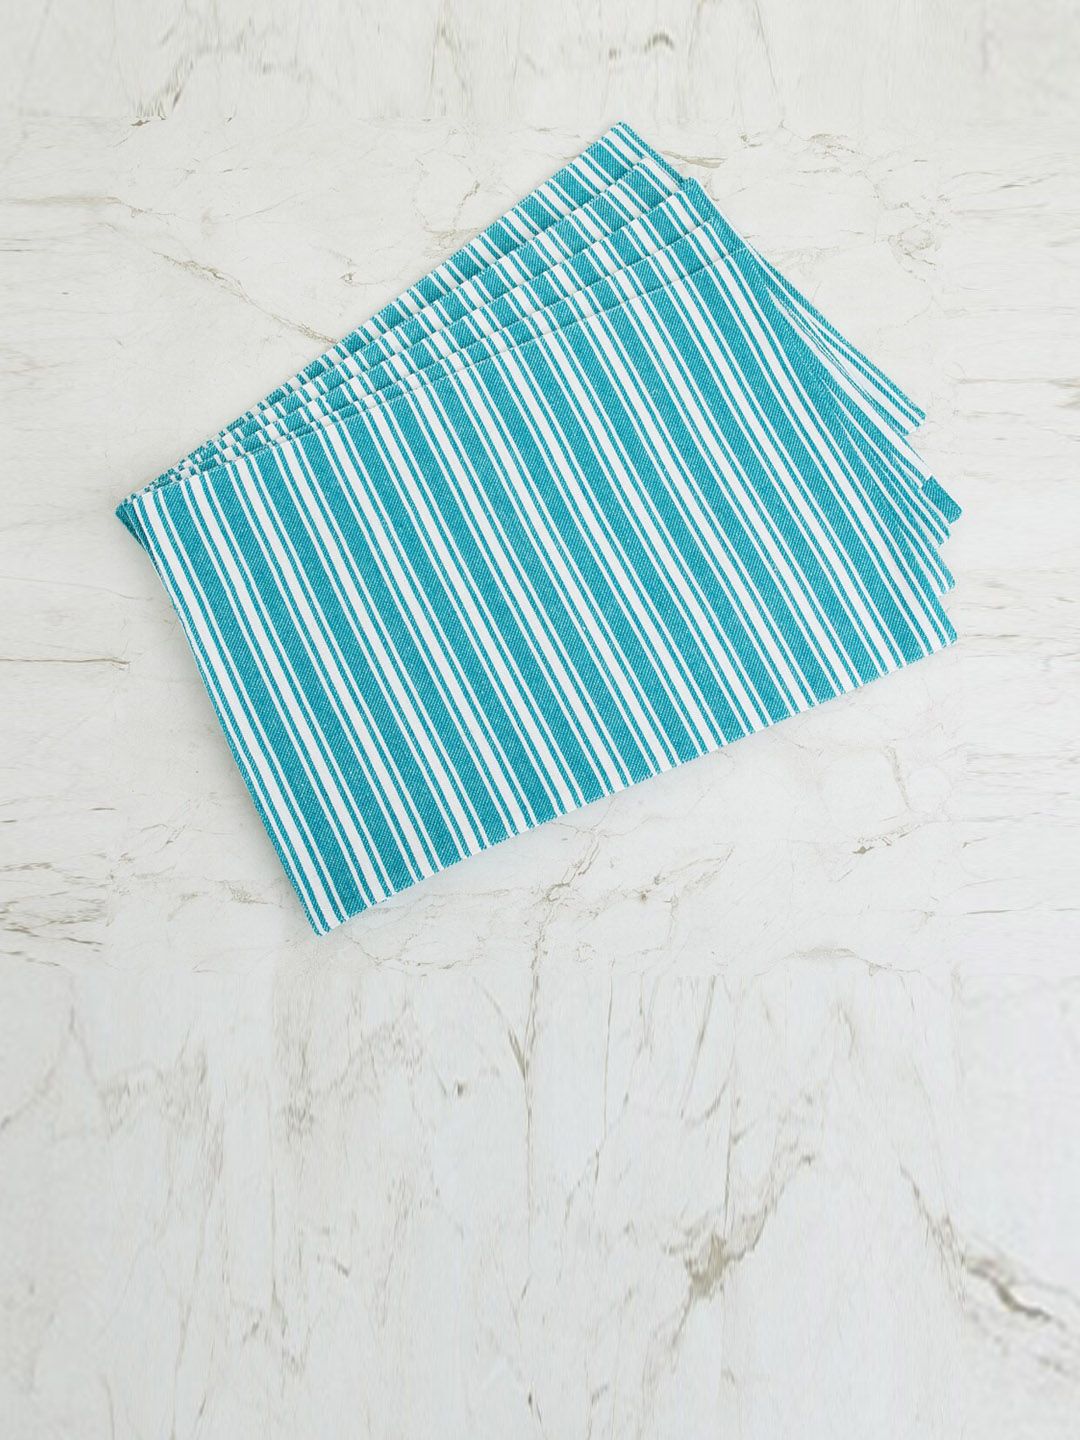 Home Centre Set Of 6 Blue & White Striped Table Placemats Price in India